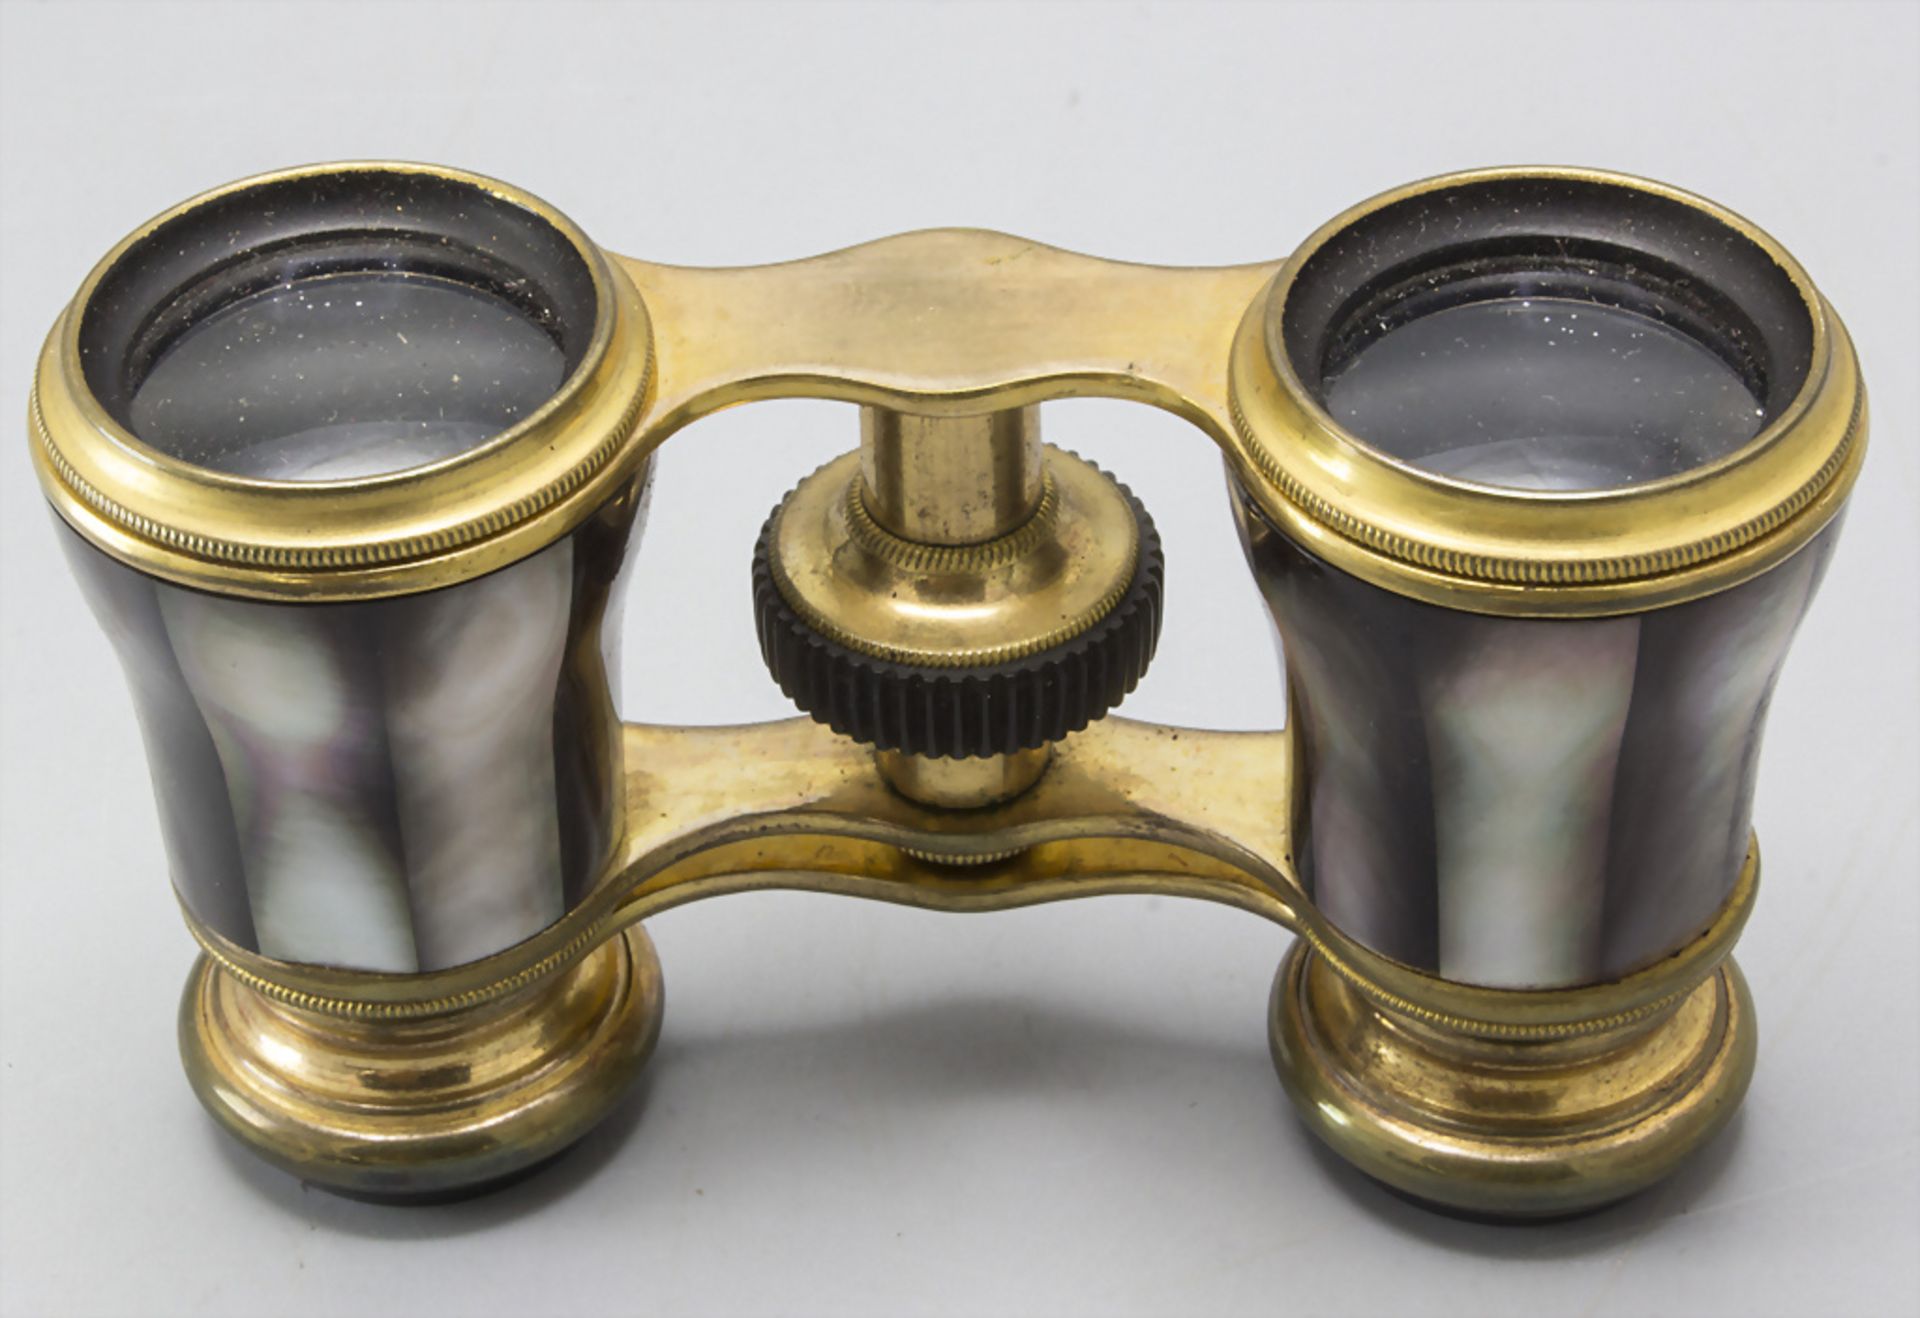 Opernglas mit Perlmuttbesatz / An opera glass with mother-of-pearl patterns, um 1900